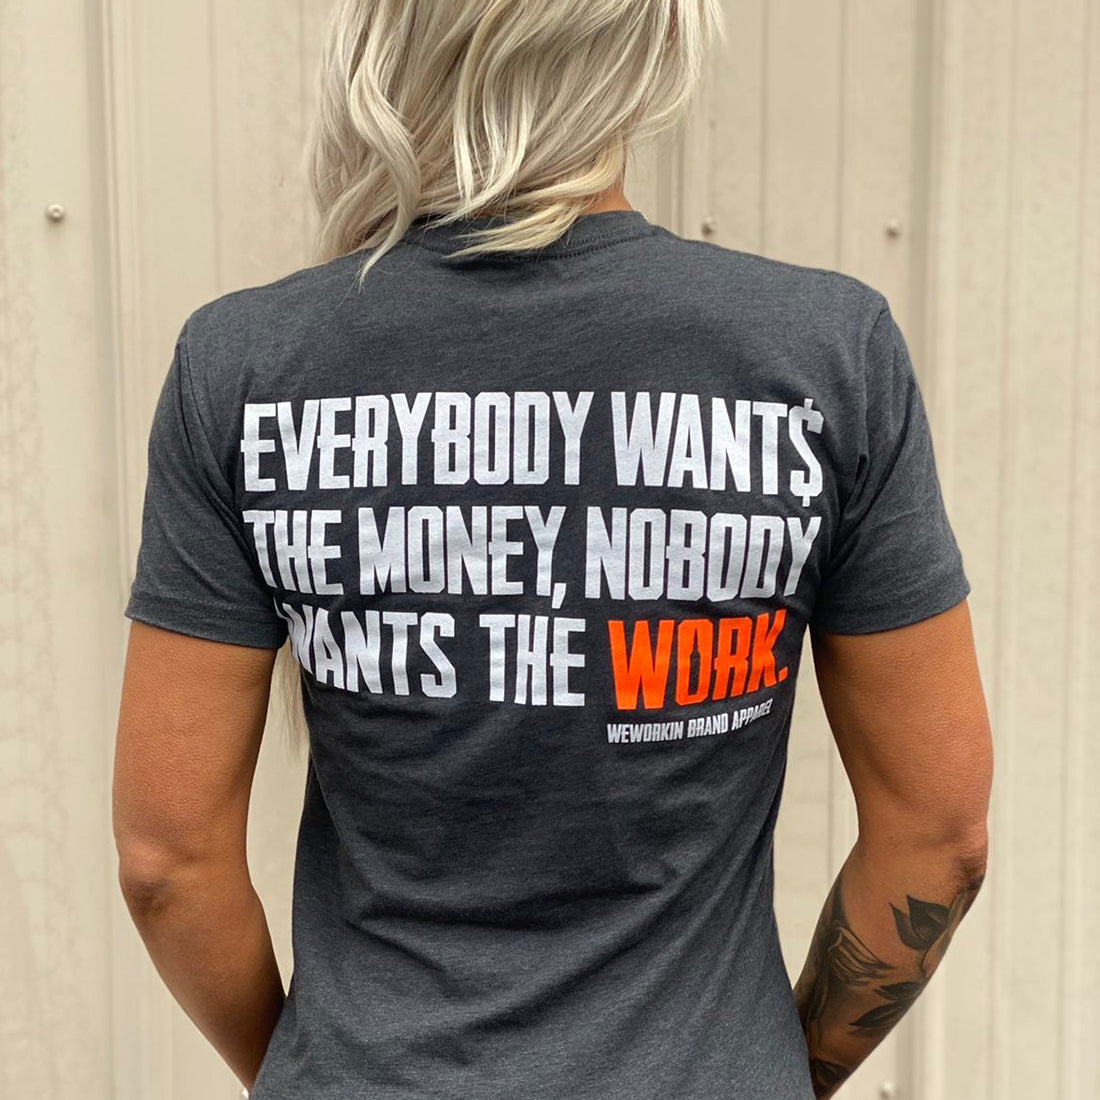 Woman pictured from back wearing a WW Charcoal Heather Grey Graphic Tee. "EVERYBODY WANT$ THE MONEY, NOBODY WANTS THE WORK" printed in bold on full back width in white ink, except the word WORK is printed in Neon Orange for emphasis. (WEWORKIN BRAND APPAREL printed small and lower right just below the full back imprint.)